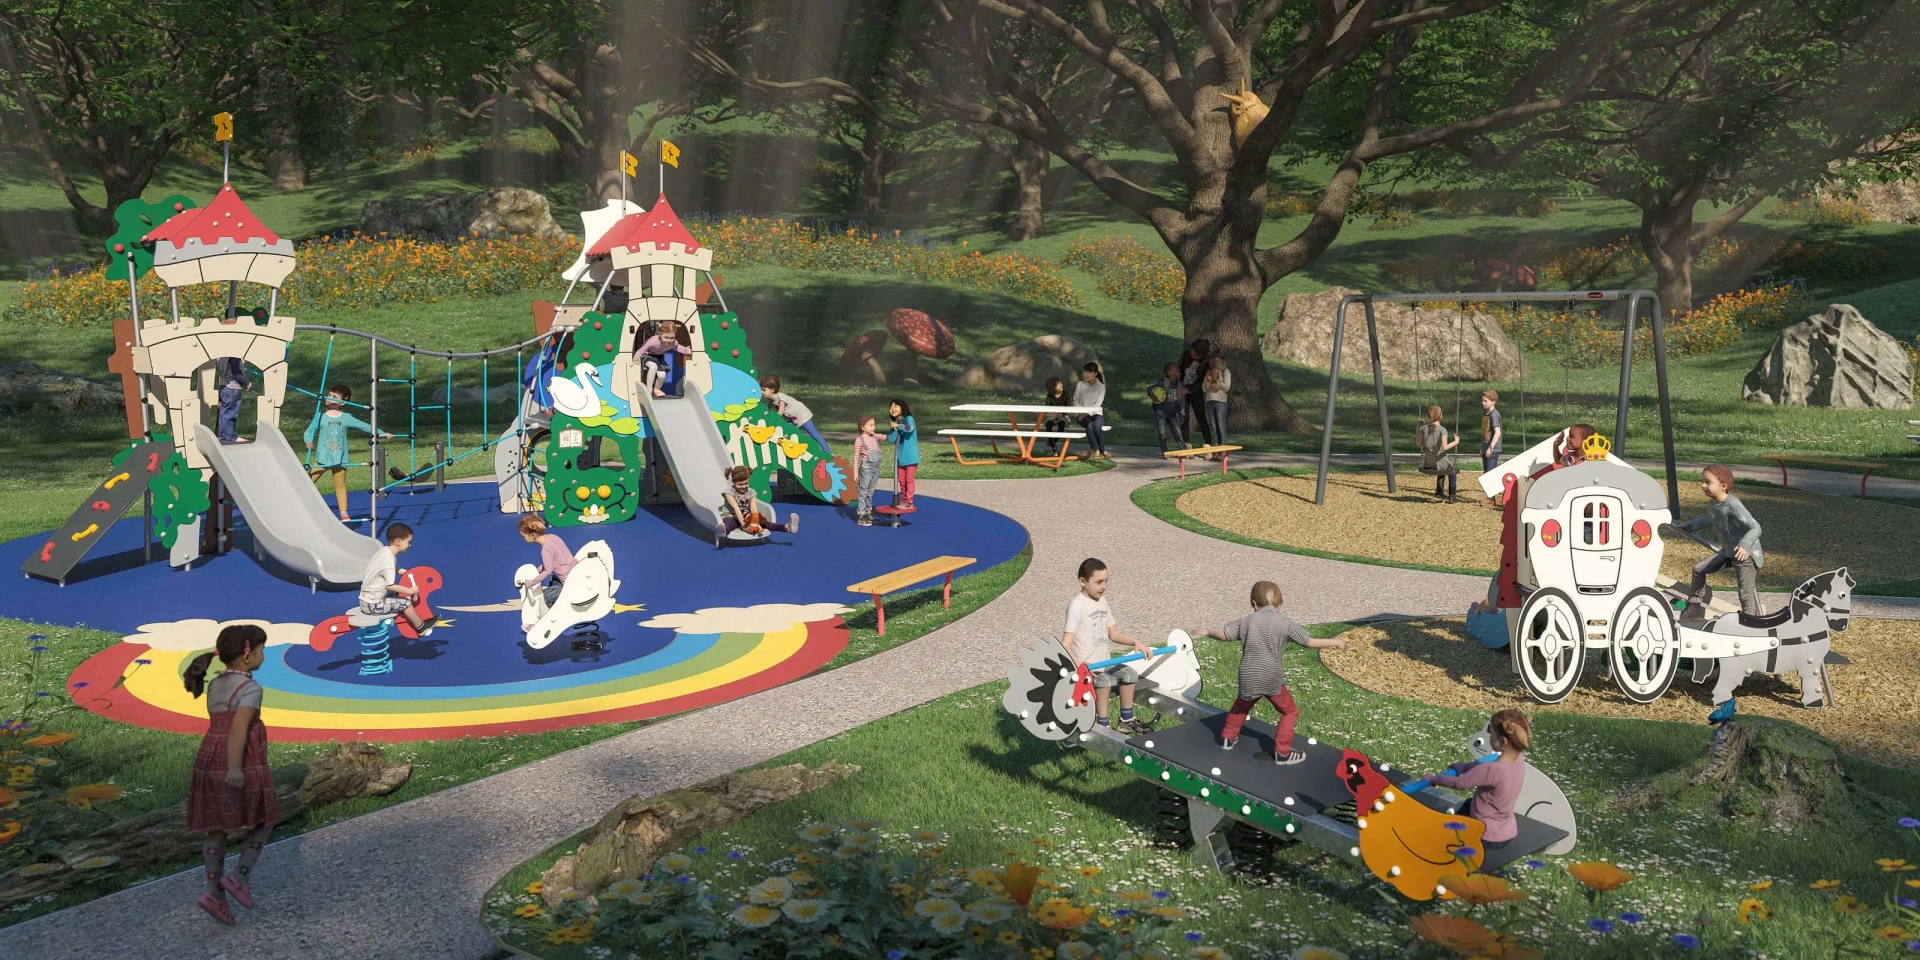 Design idea for a playground with a fairy tale theme